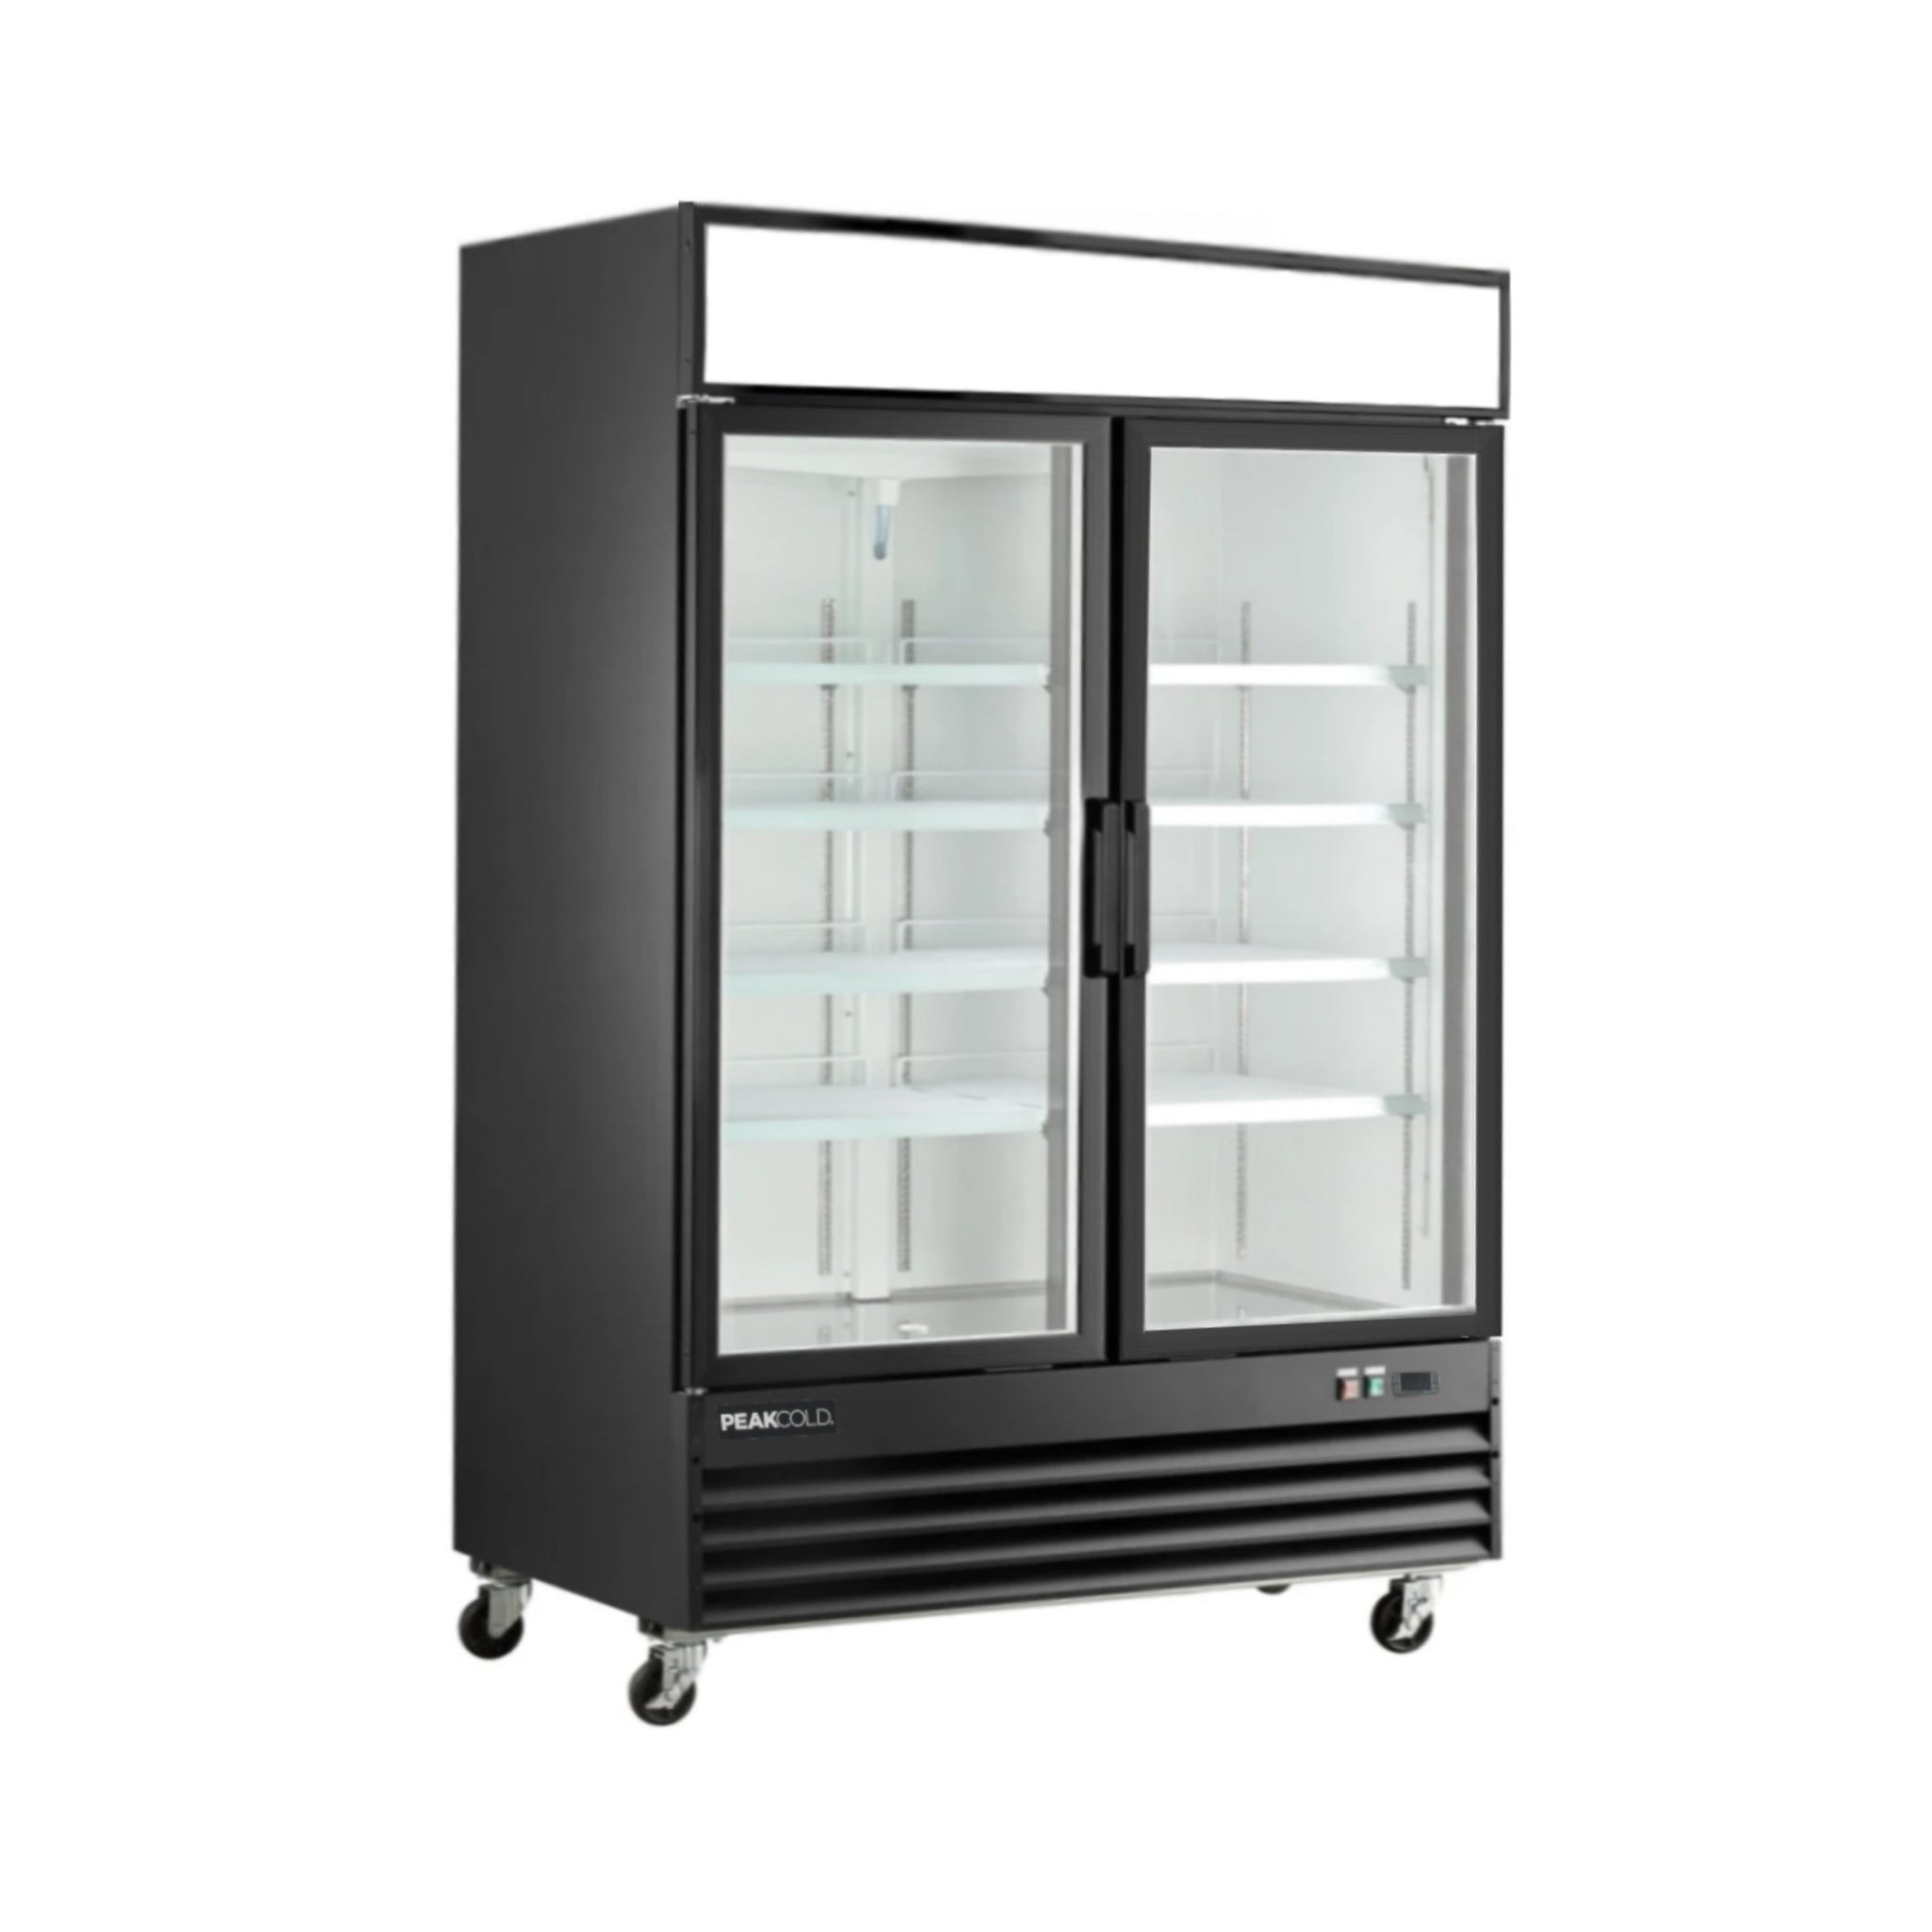 21++ Commercial freezer for sale in nepal ideas in 2021 